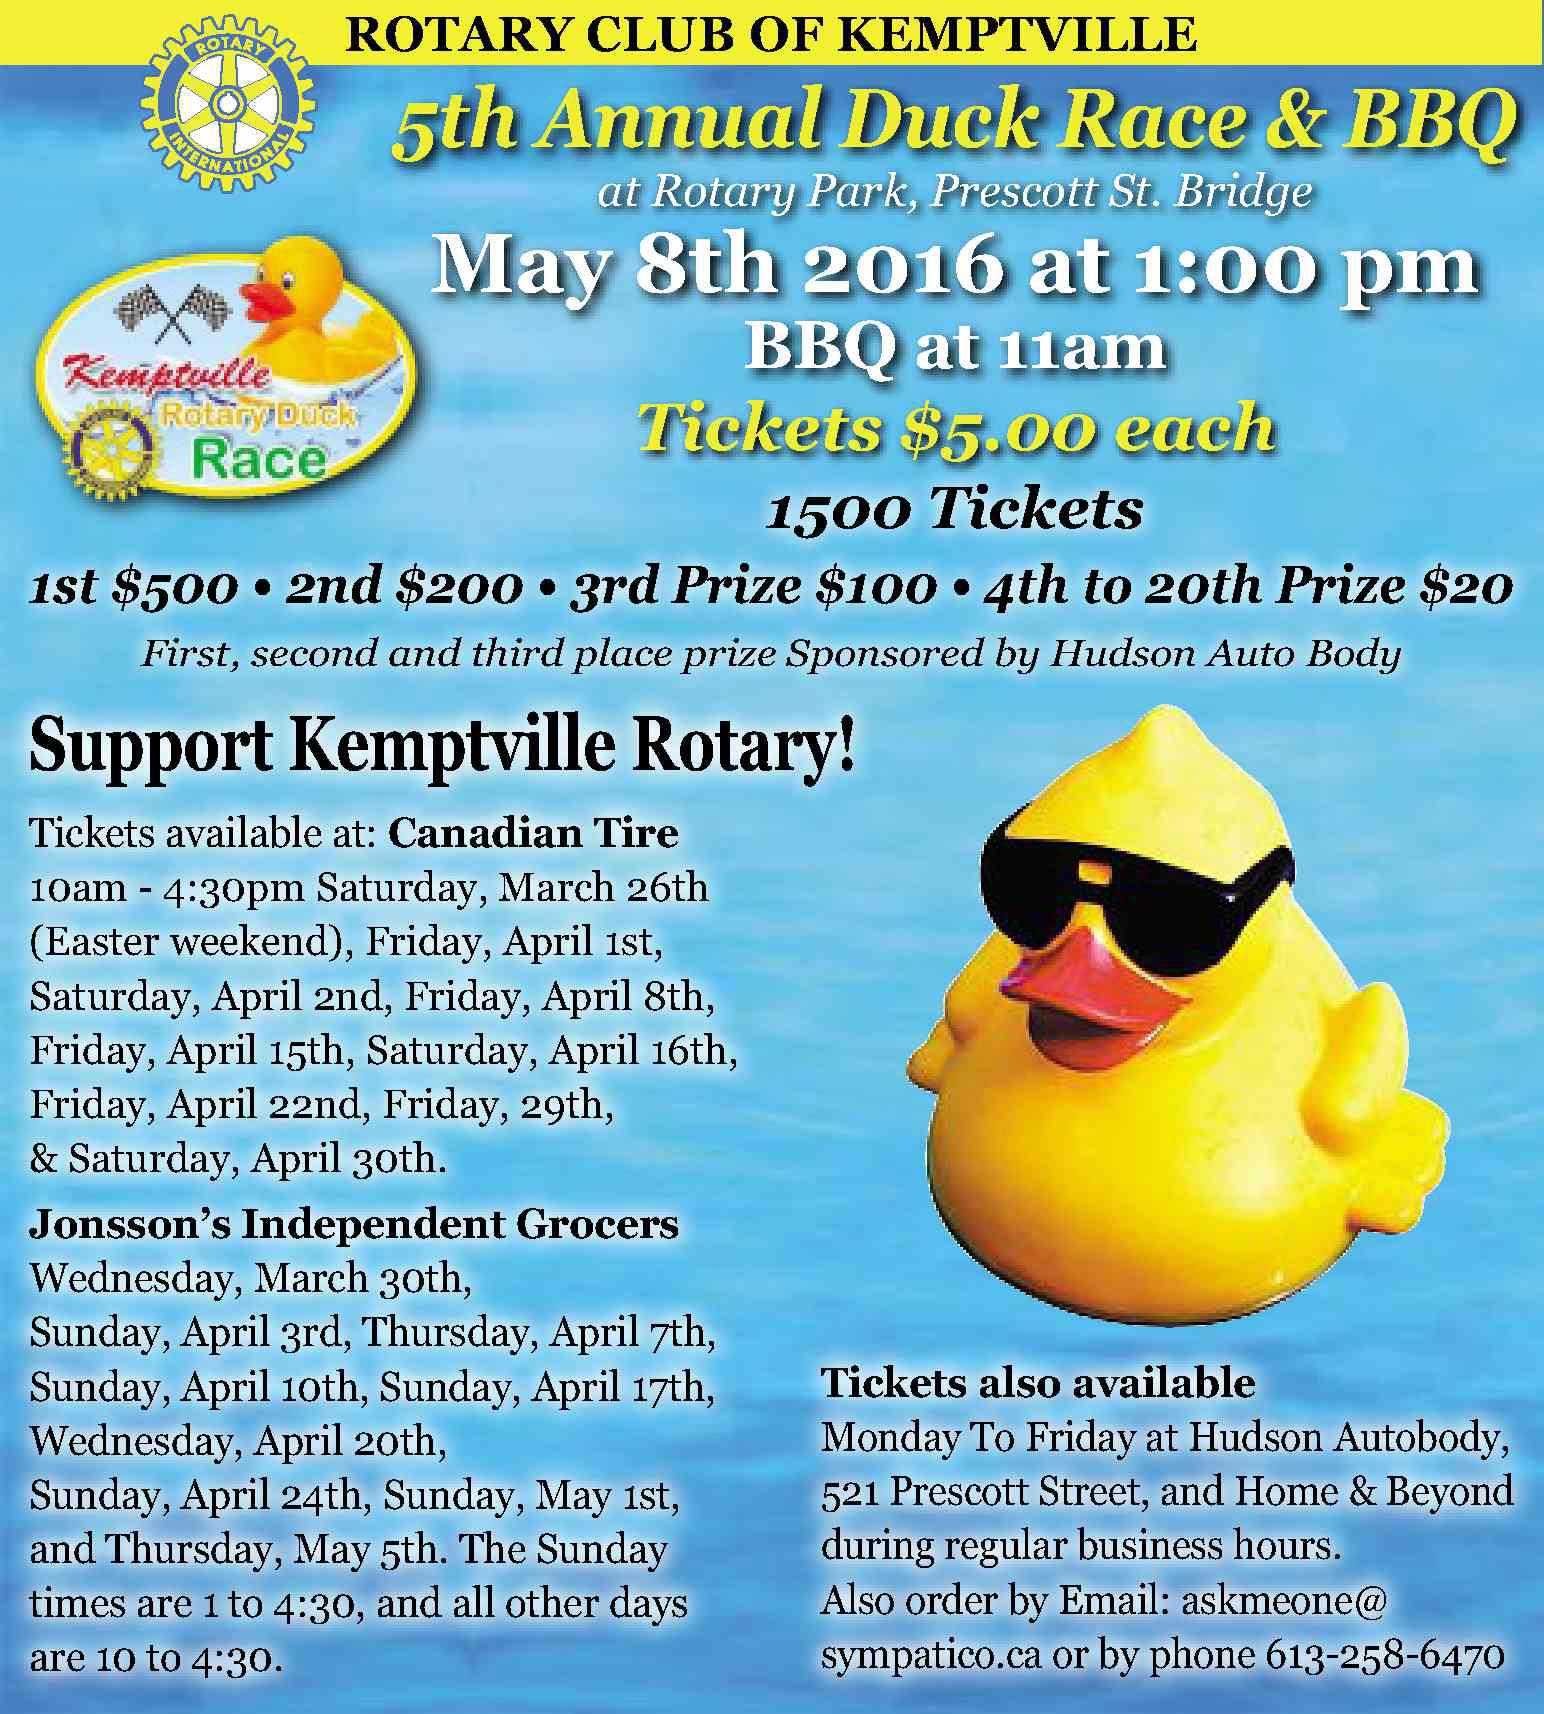 Annual Rotary Duck Race Rotary Club of Kemptville